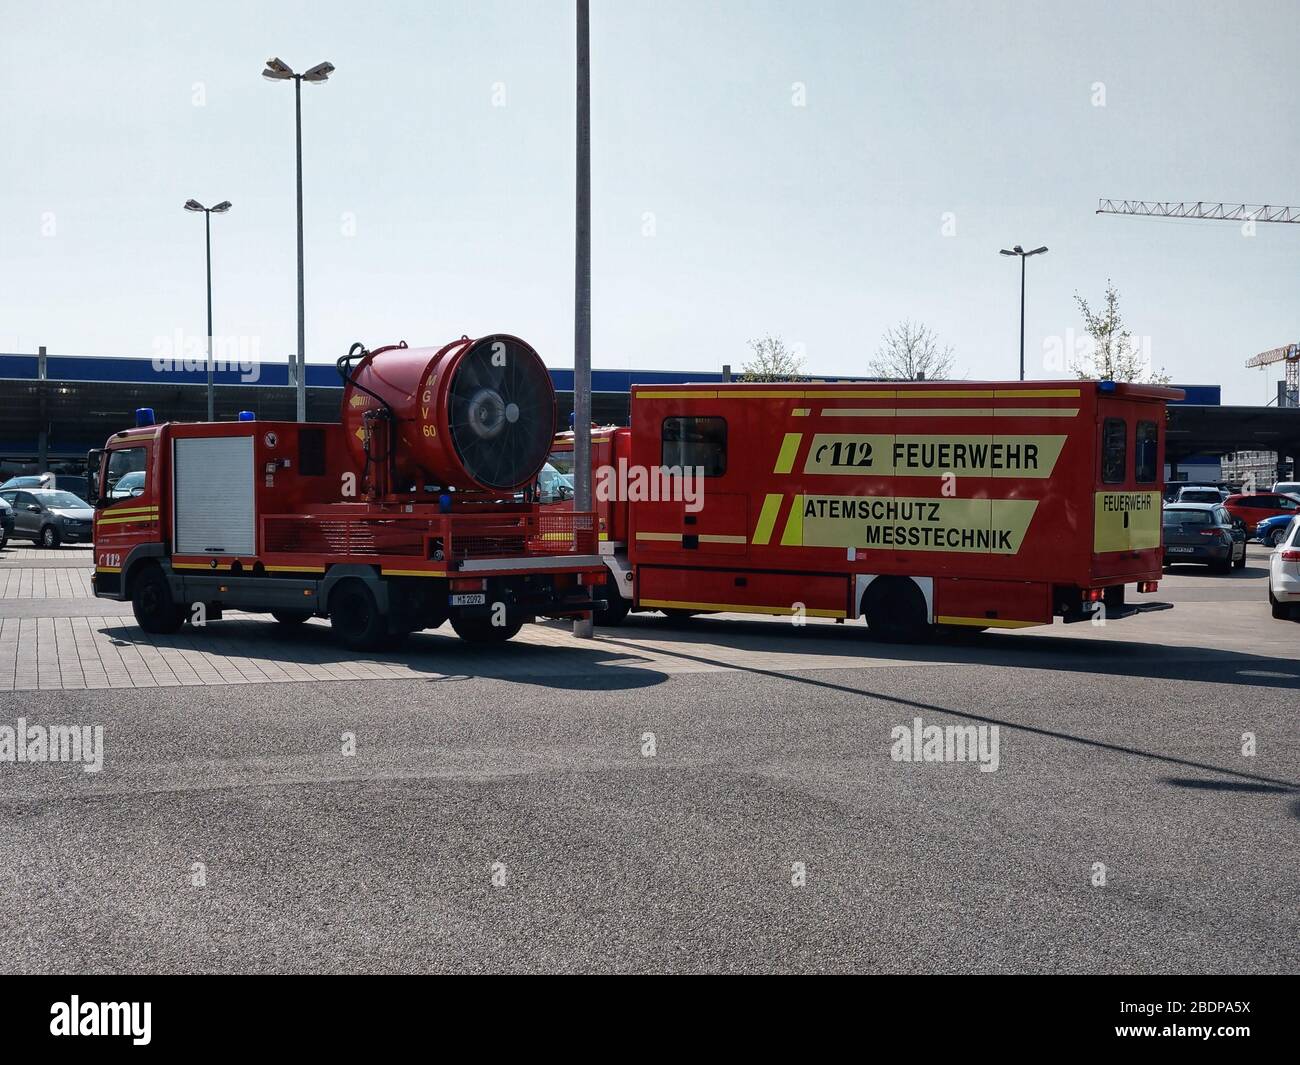 Munich, Bavaria, Germany. 9th Apr, 2020. Atemschutz Messtechnik GW-AS vehicles from the Muenchen Feuerwehr. These vehicles are mobilized to sites where there are dangerous substances involved. Credit: Sachelle Babbar/ZUMA Wire/Alamy Live News Stock Photo